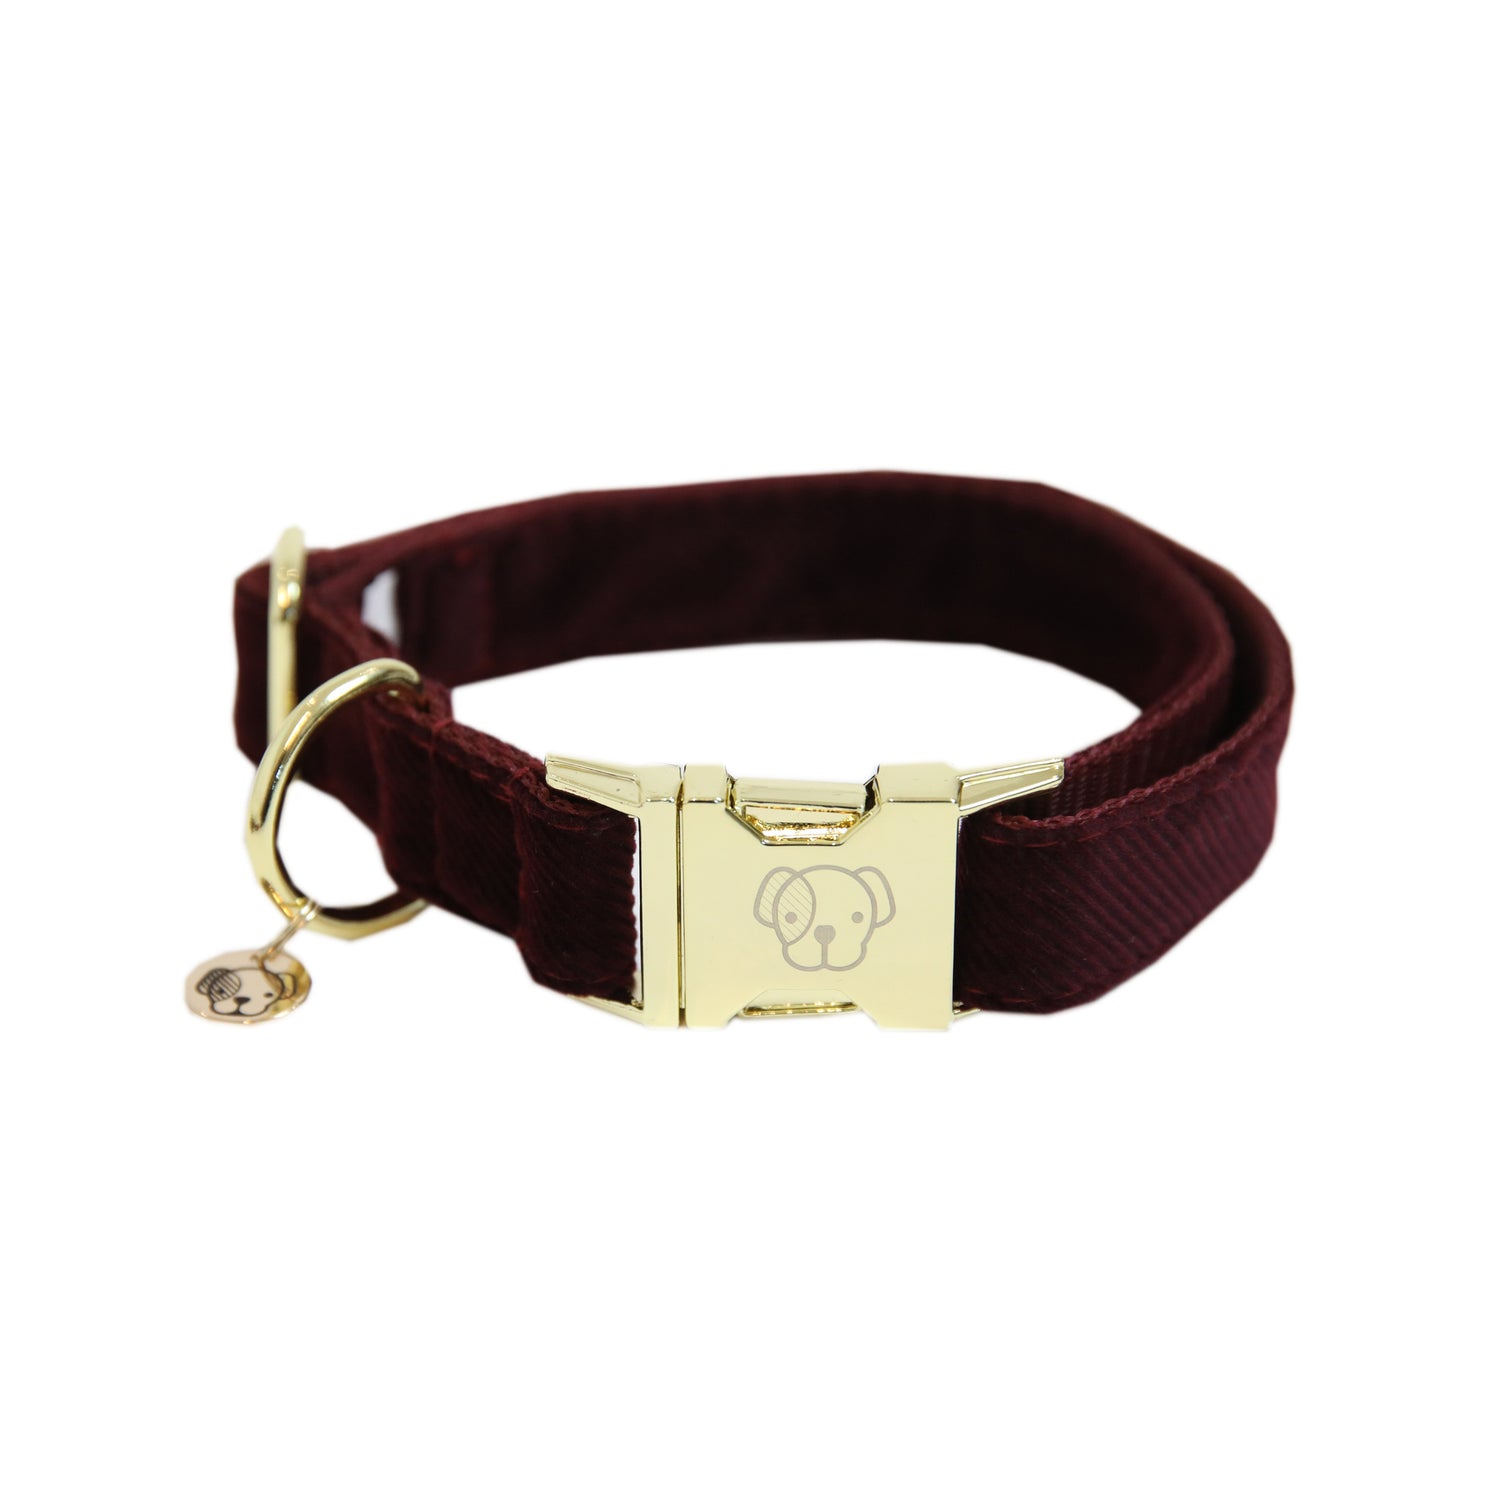 The Kentucky Corduroy collar give your dog the luxury it deserves. The is made from a super soft baby cord  and lined with nylon for extra strength and durability.  The collar is fully adjustable to meet your dogs needs, features the gold Kentucky logo clasp and gold dog tag to engrave your details.    Matching lead available. 